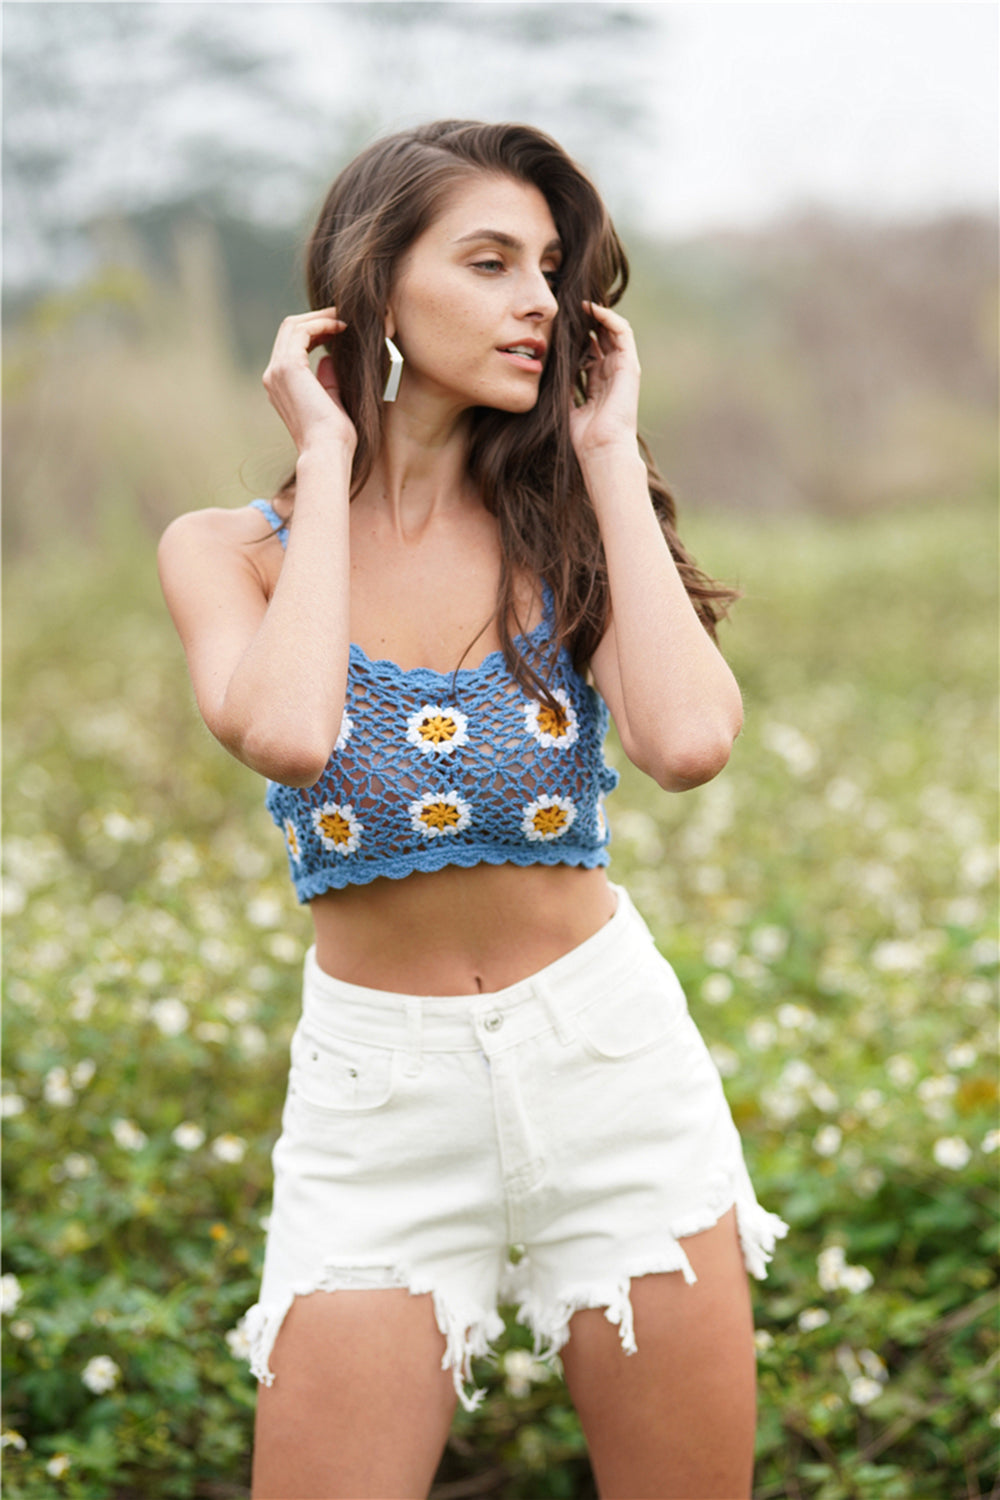 Floral Crochet Cropped Cami in Size S, M, L, or XL